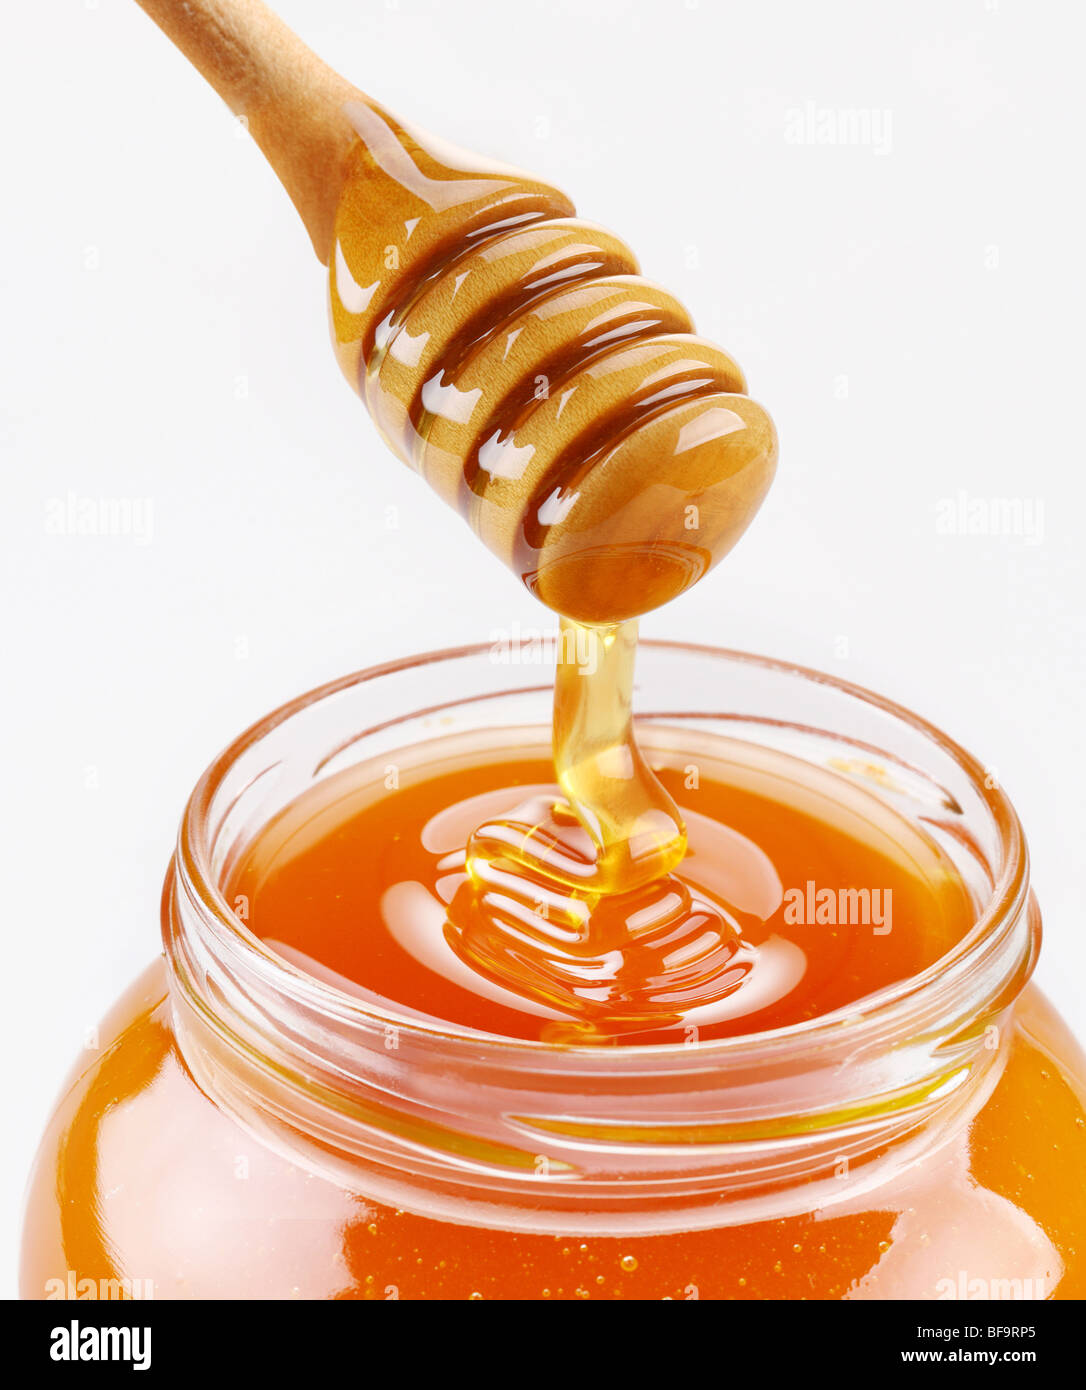 Honey dipper and full honey pot isolated on a white background Stock Photo